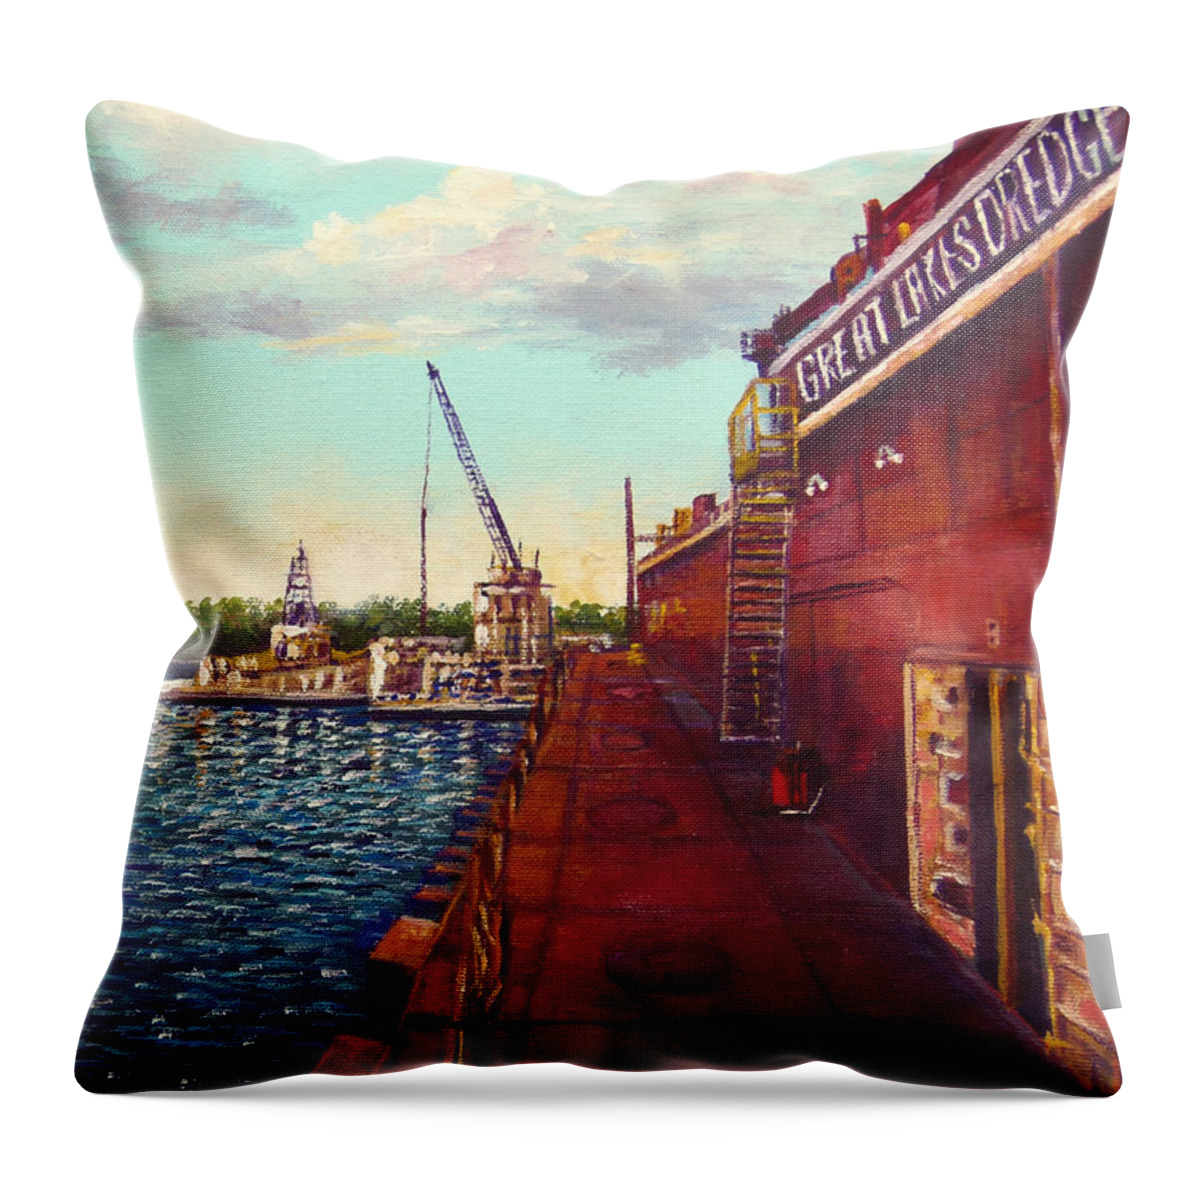 Oil Rig Throw Pillow featuring the painting Pauls Work Place by Lou Ann Bagnall